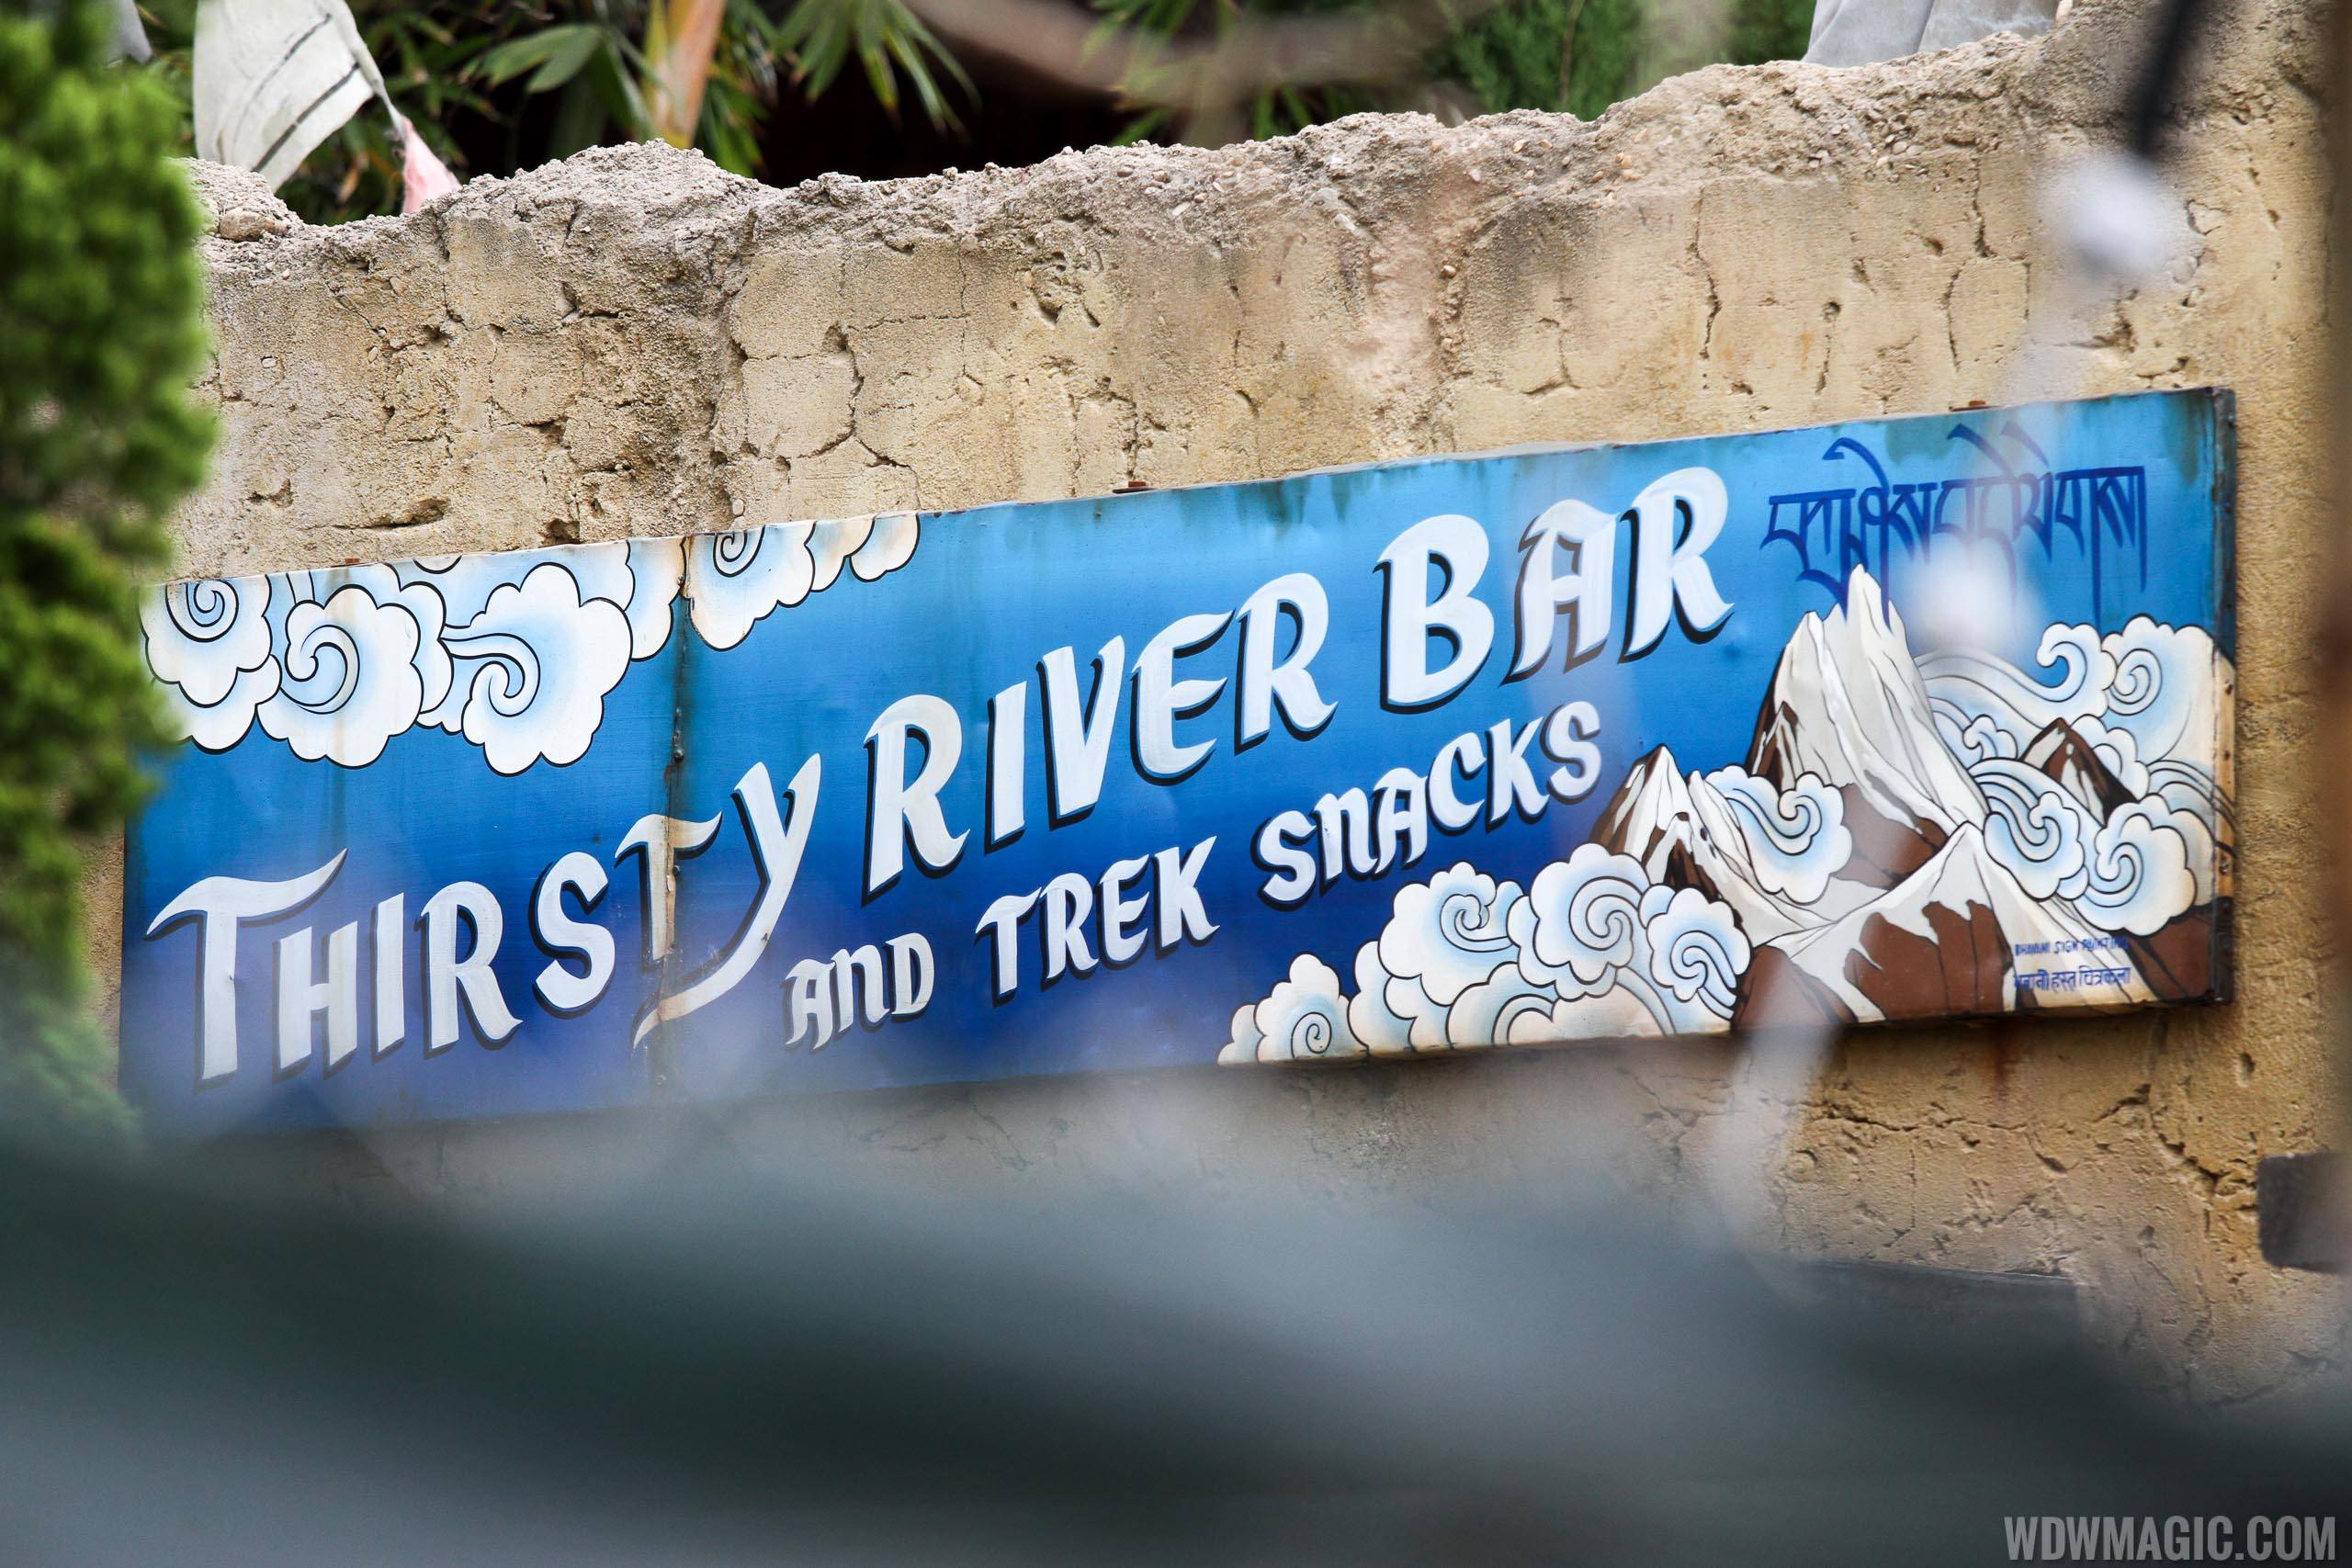 PHOTOS - Thirsty River Bar and Trek Snacks opens in December at Disney's Animal Kingdom